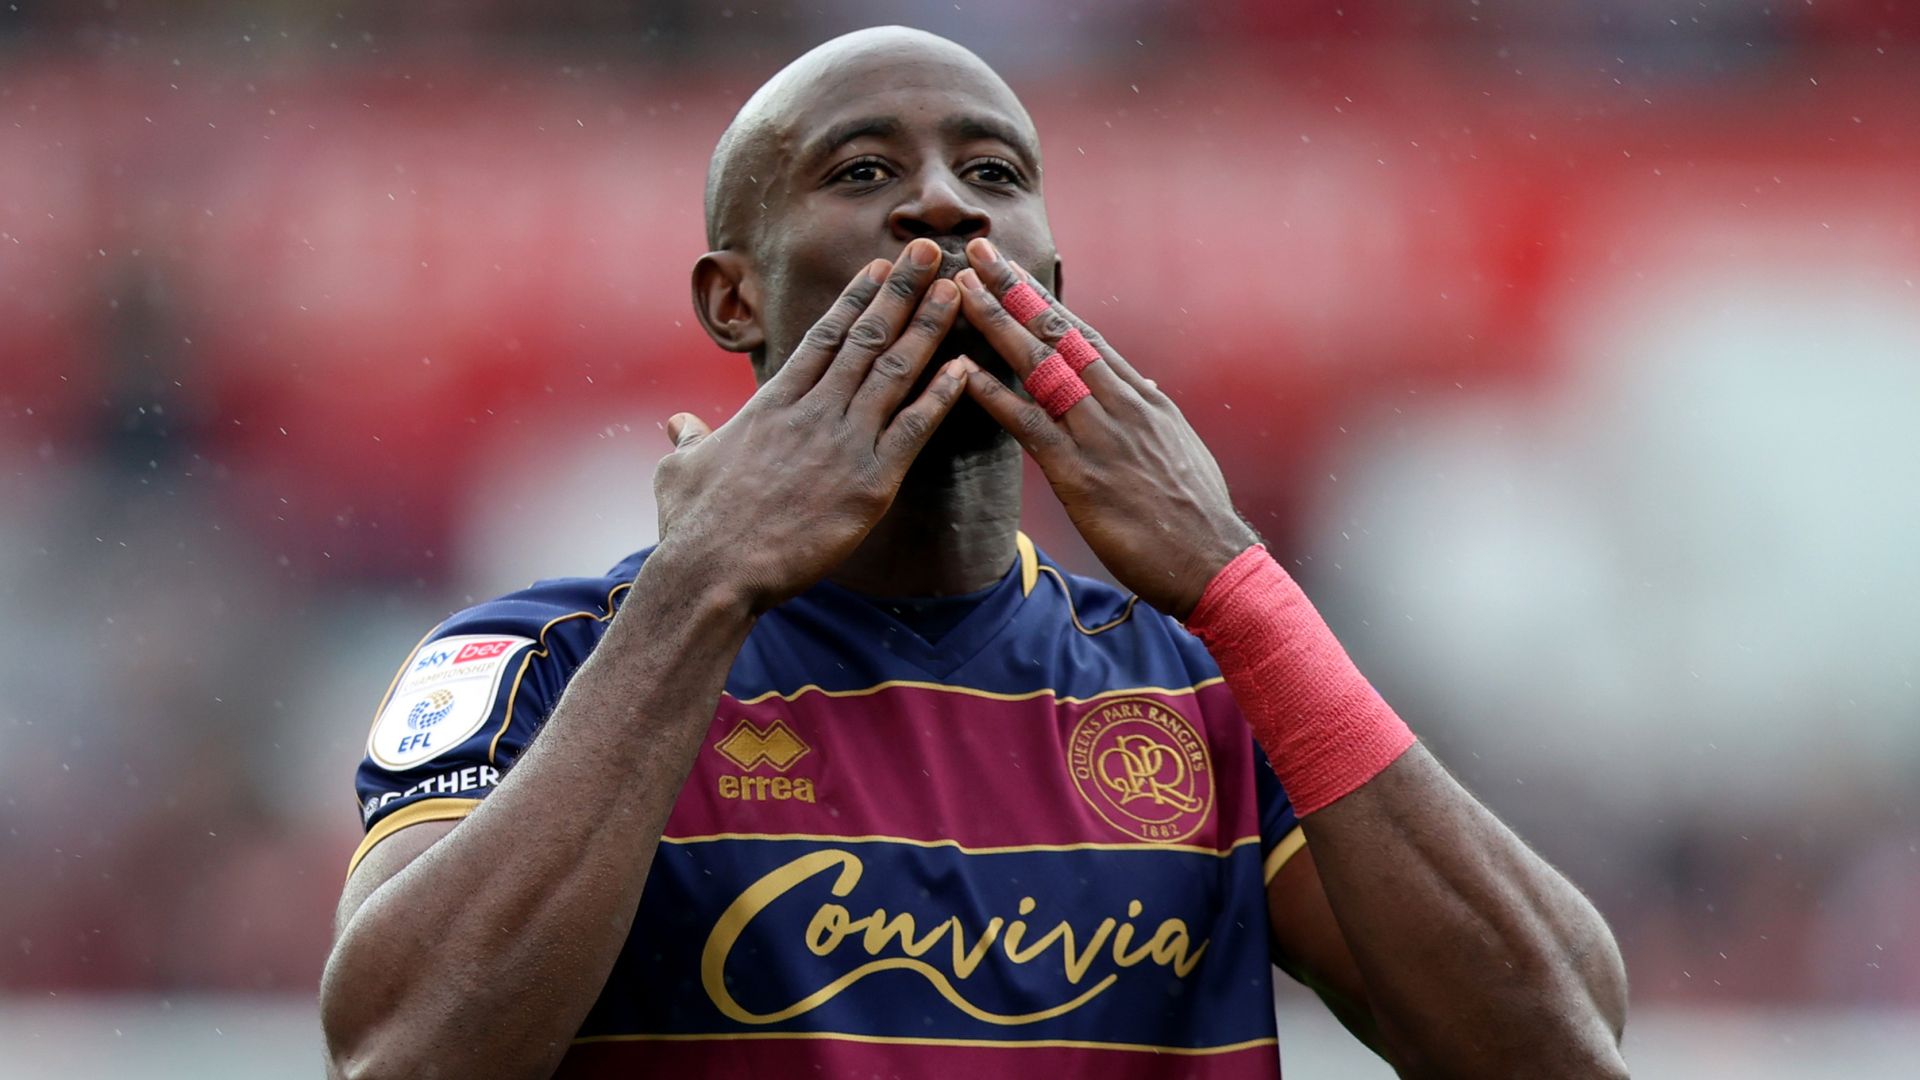 QPR win at Stoke to seal Championship survival